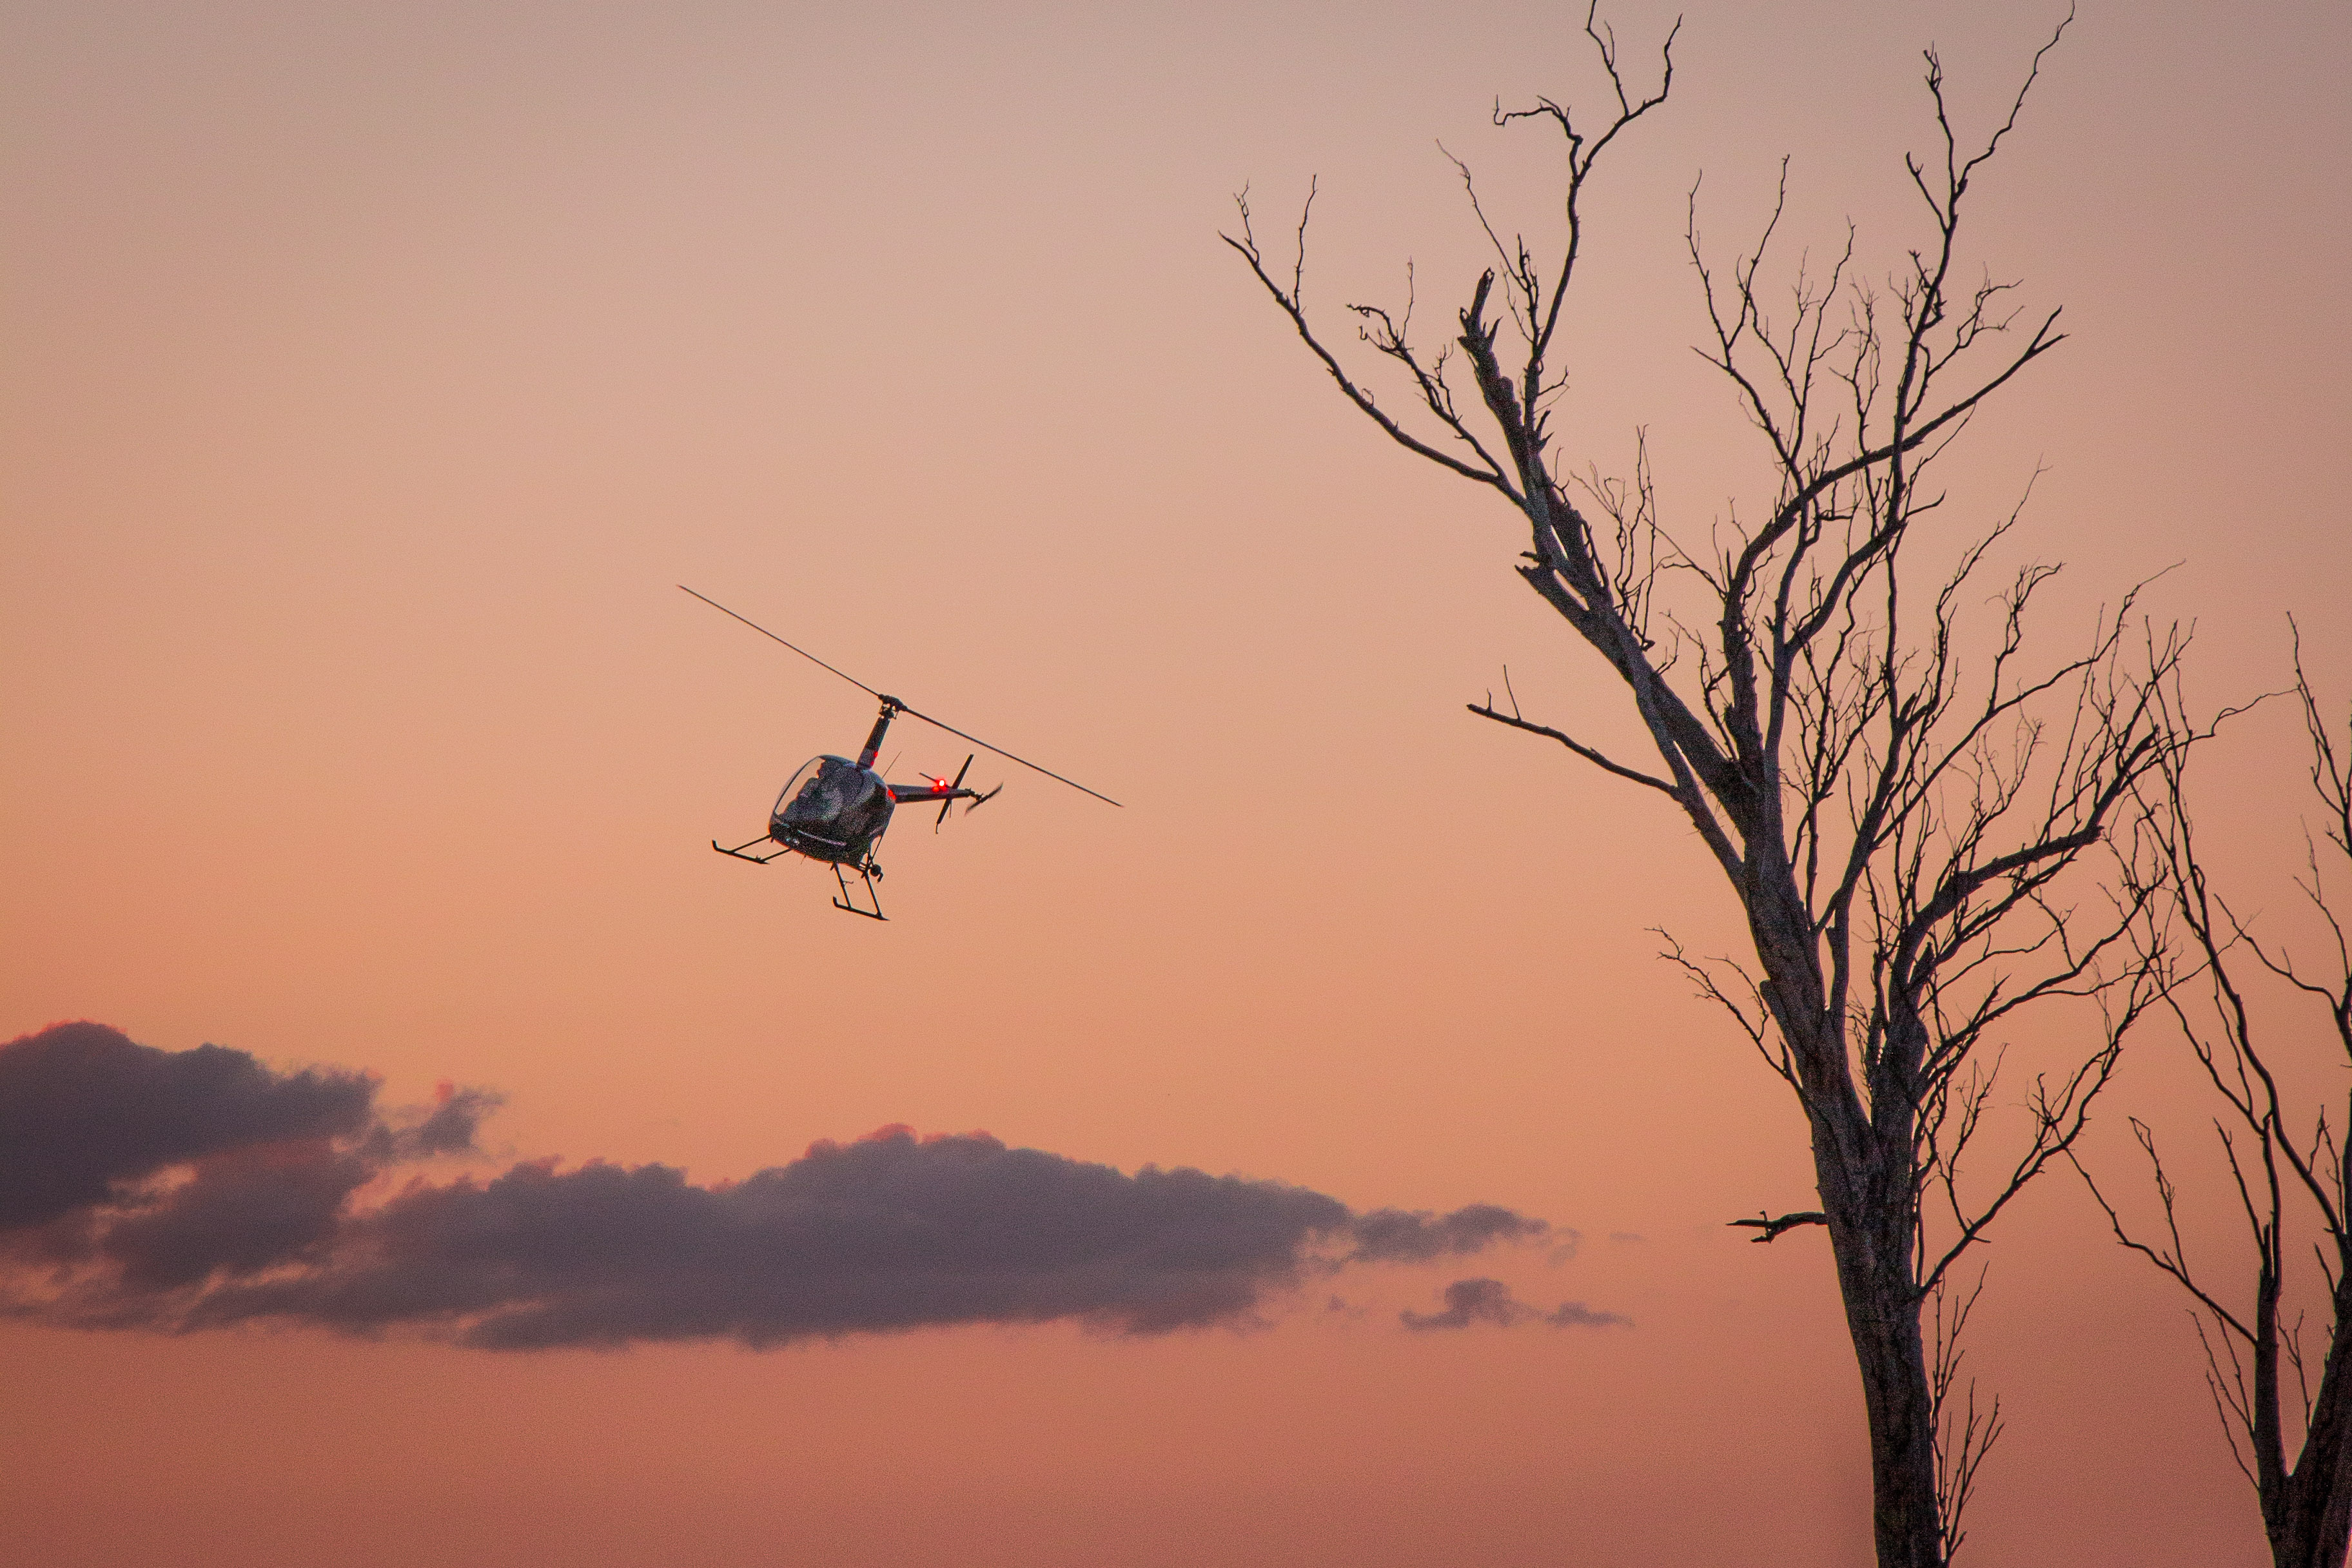 The Flying Stockman - Done and dusted, the slap of his blades echo across his paddock as he lands, to the excitement of his kids. With the sun setting and radio silent the chopper slowly winds down. He removes his helmet, lets out a big sigh, turns and says “It doesn’t get much better than that aye”